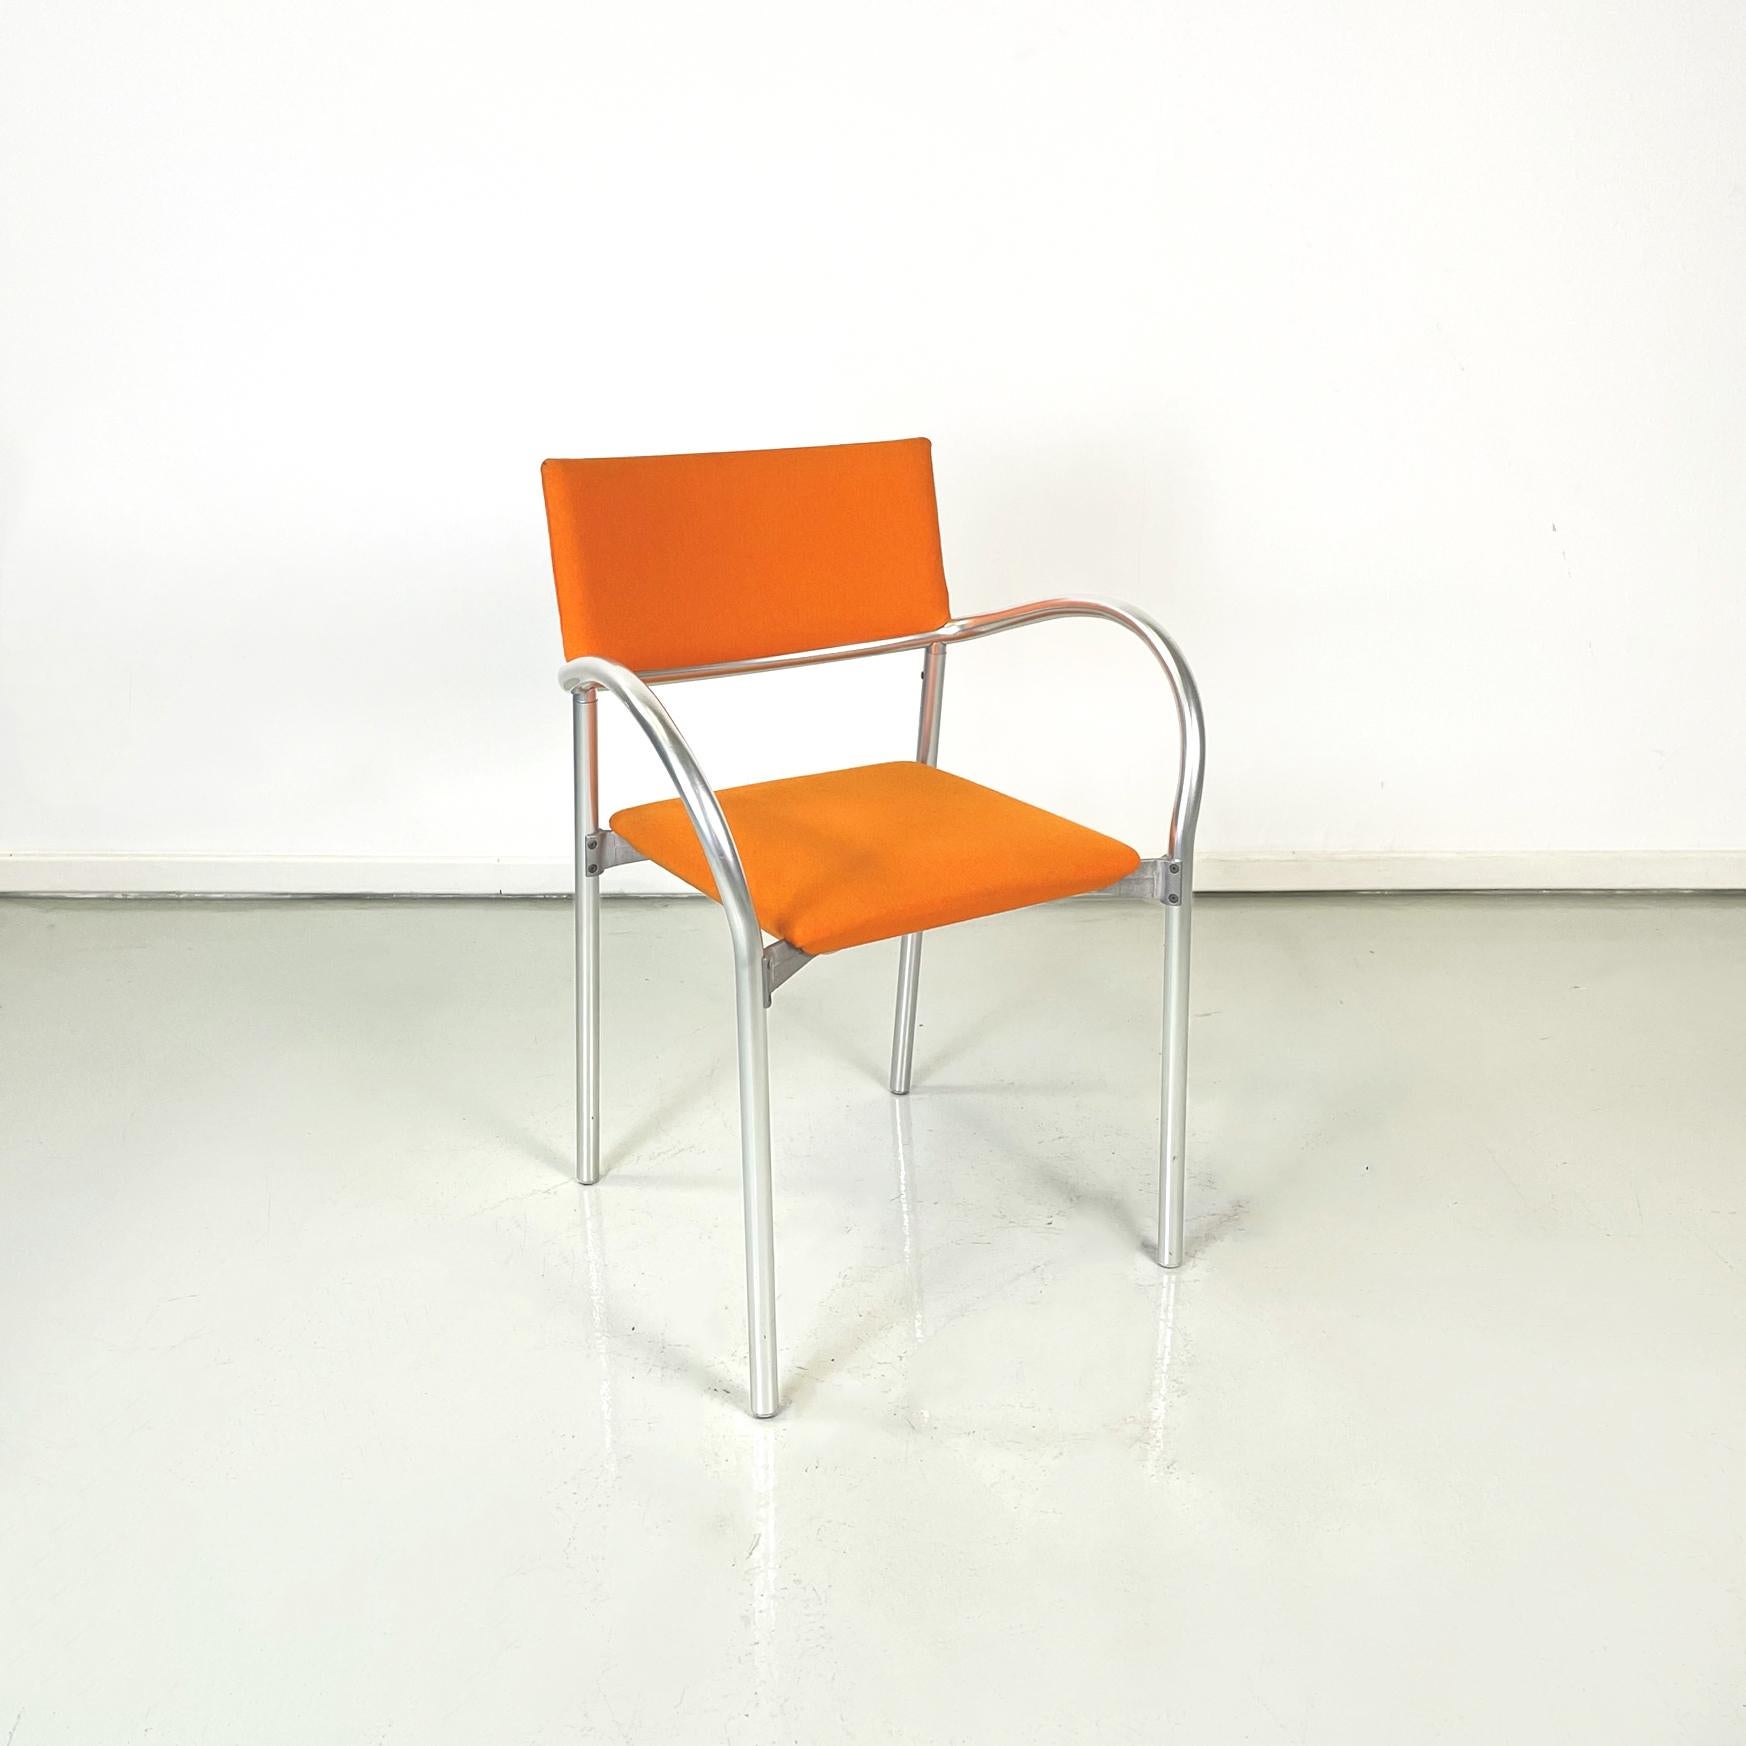 Italian modern orange fabric Chairs mod. Breeze by Carlo Bartoli for Segis, 1980s
Pair of chairs mod. Breeze with matt aluminum tubular structure. The seat and backrest are padded and covered in orange fabric. Armrests present. Chair suitable for